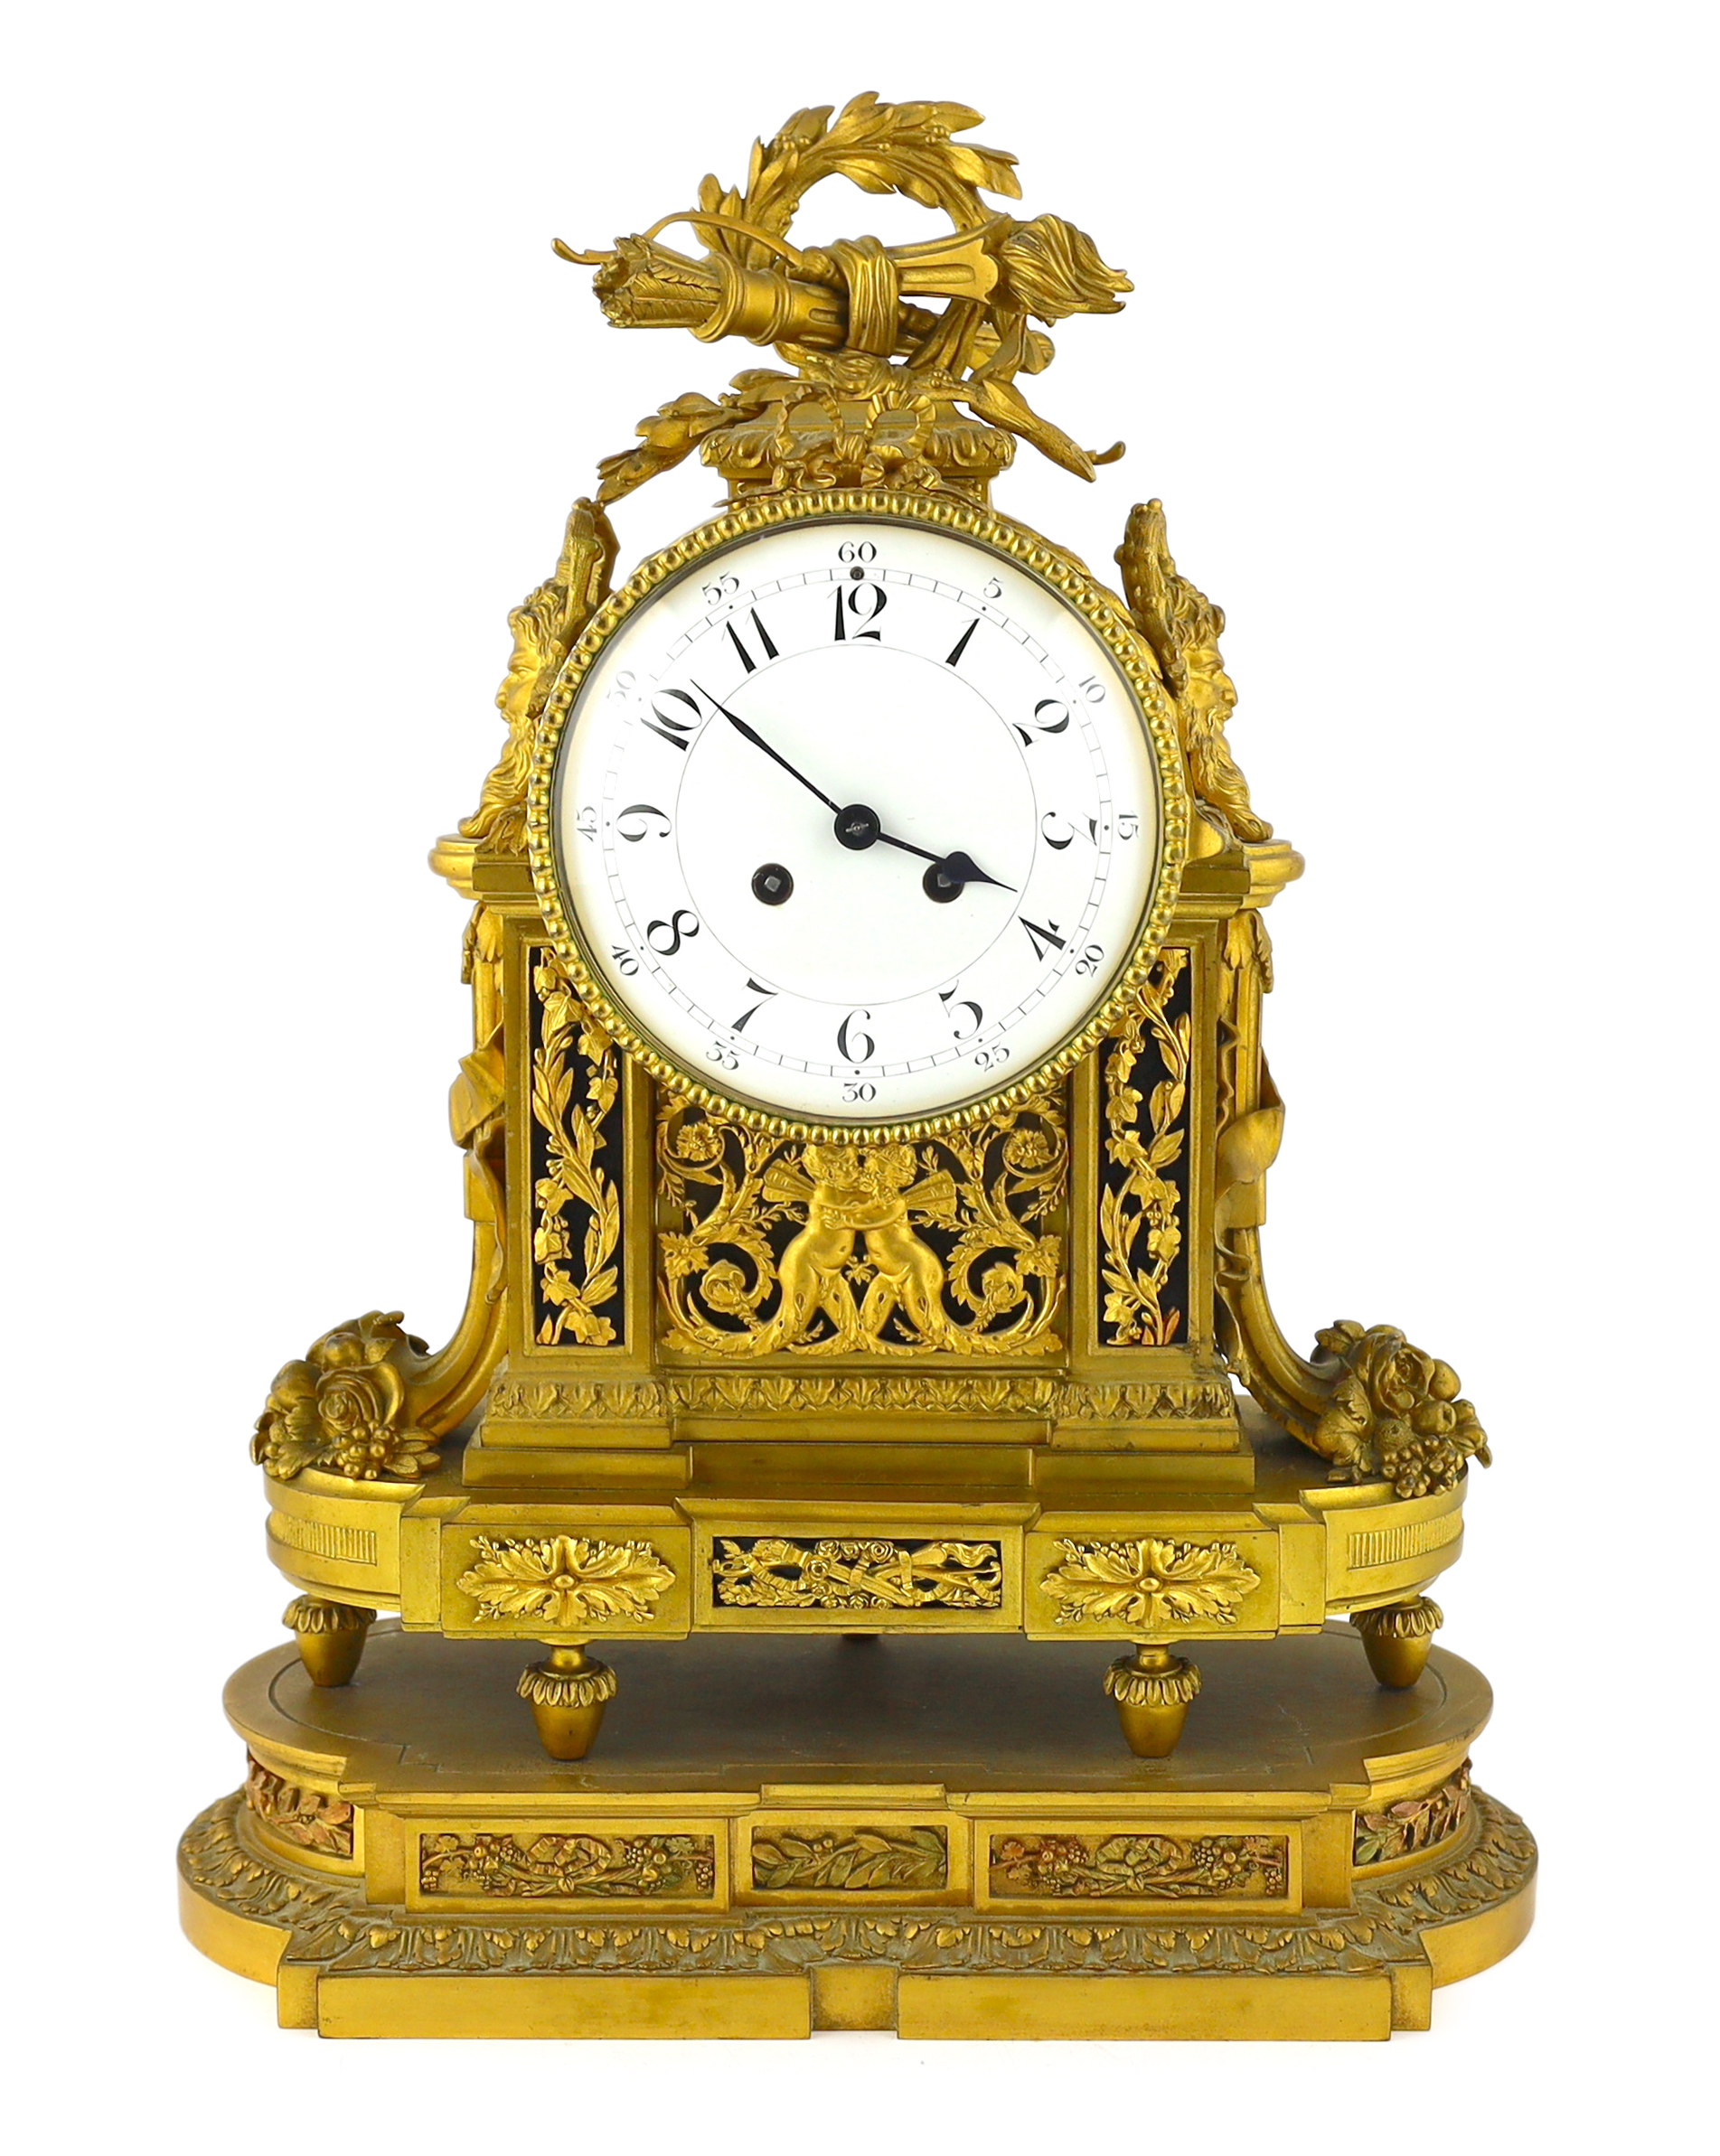 A 19th century French Louis XVI style ormolu mantel clock, with torch, bow and quiver finial over